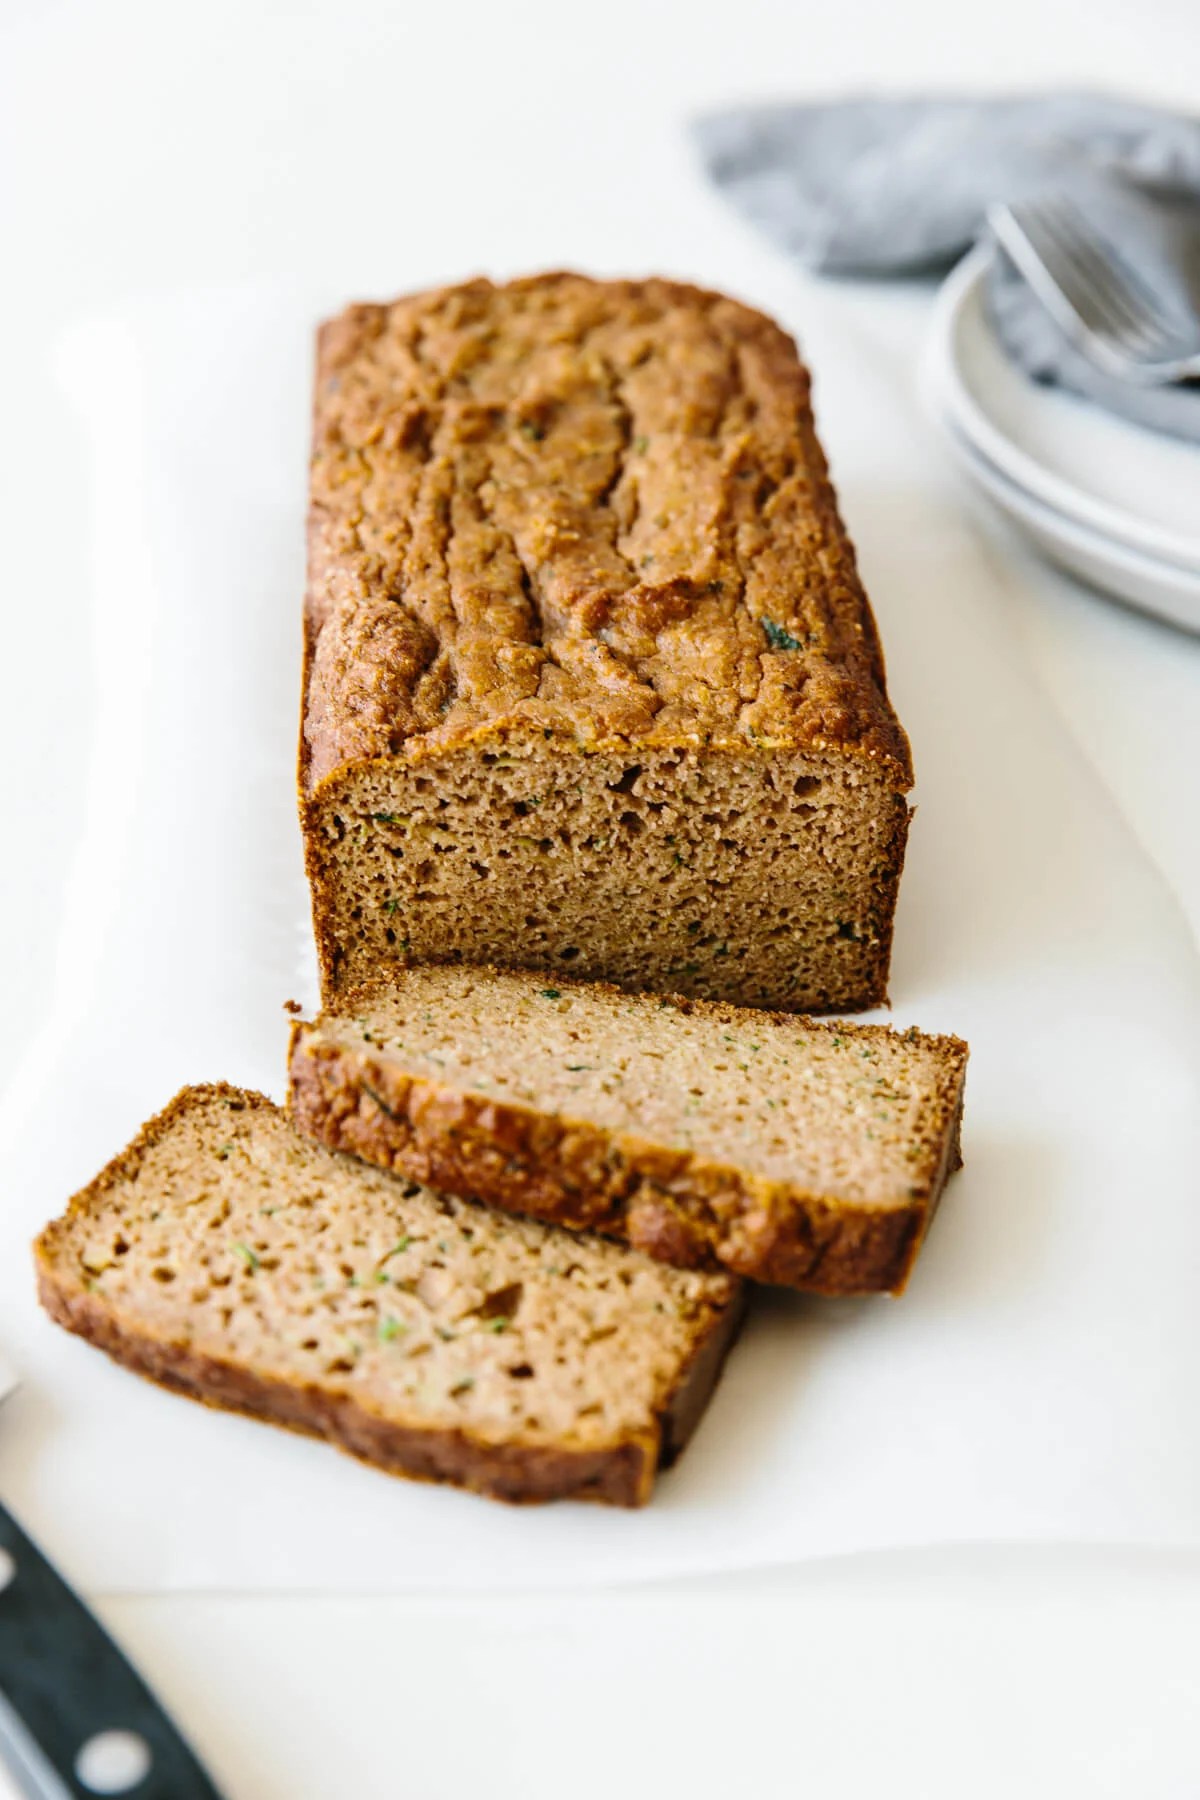 Paleo zucchini bread on a table with two slices from the loaf.